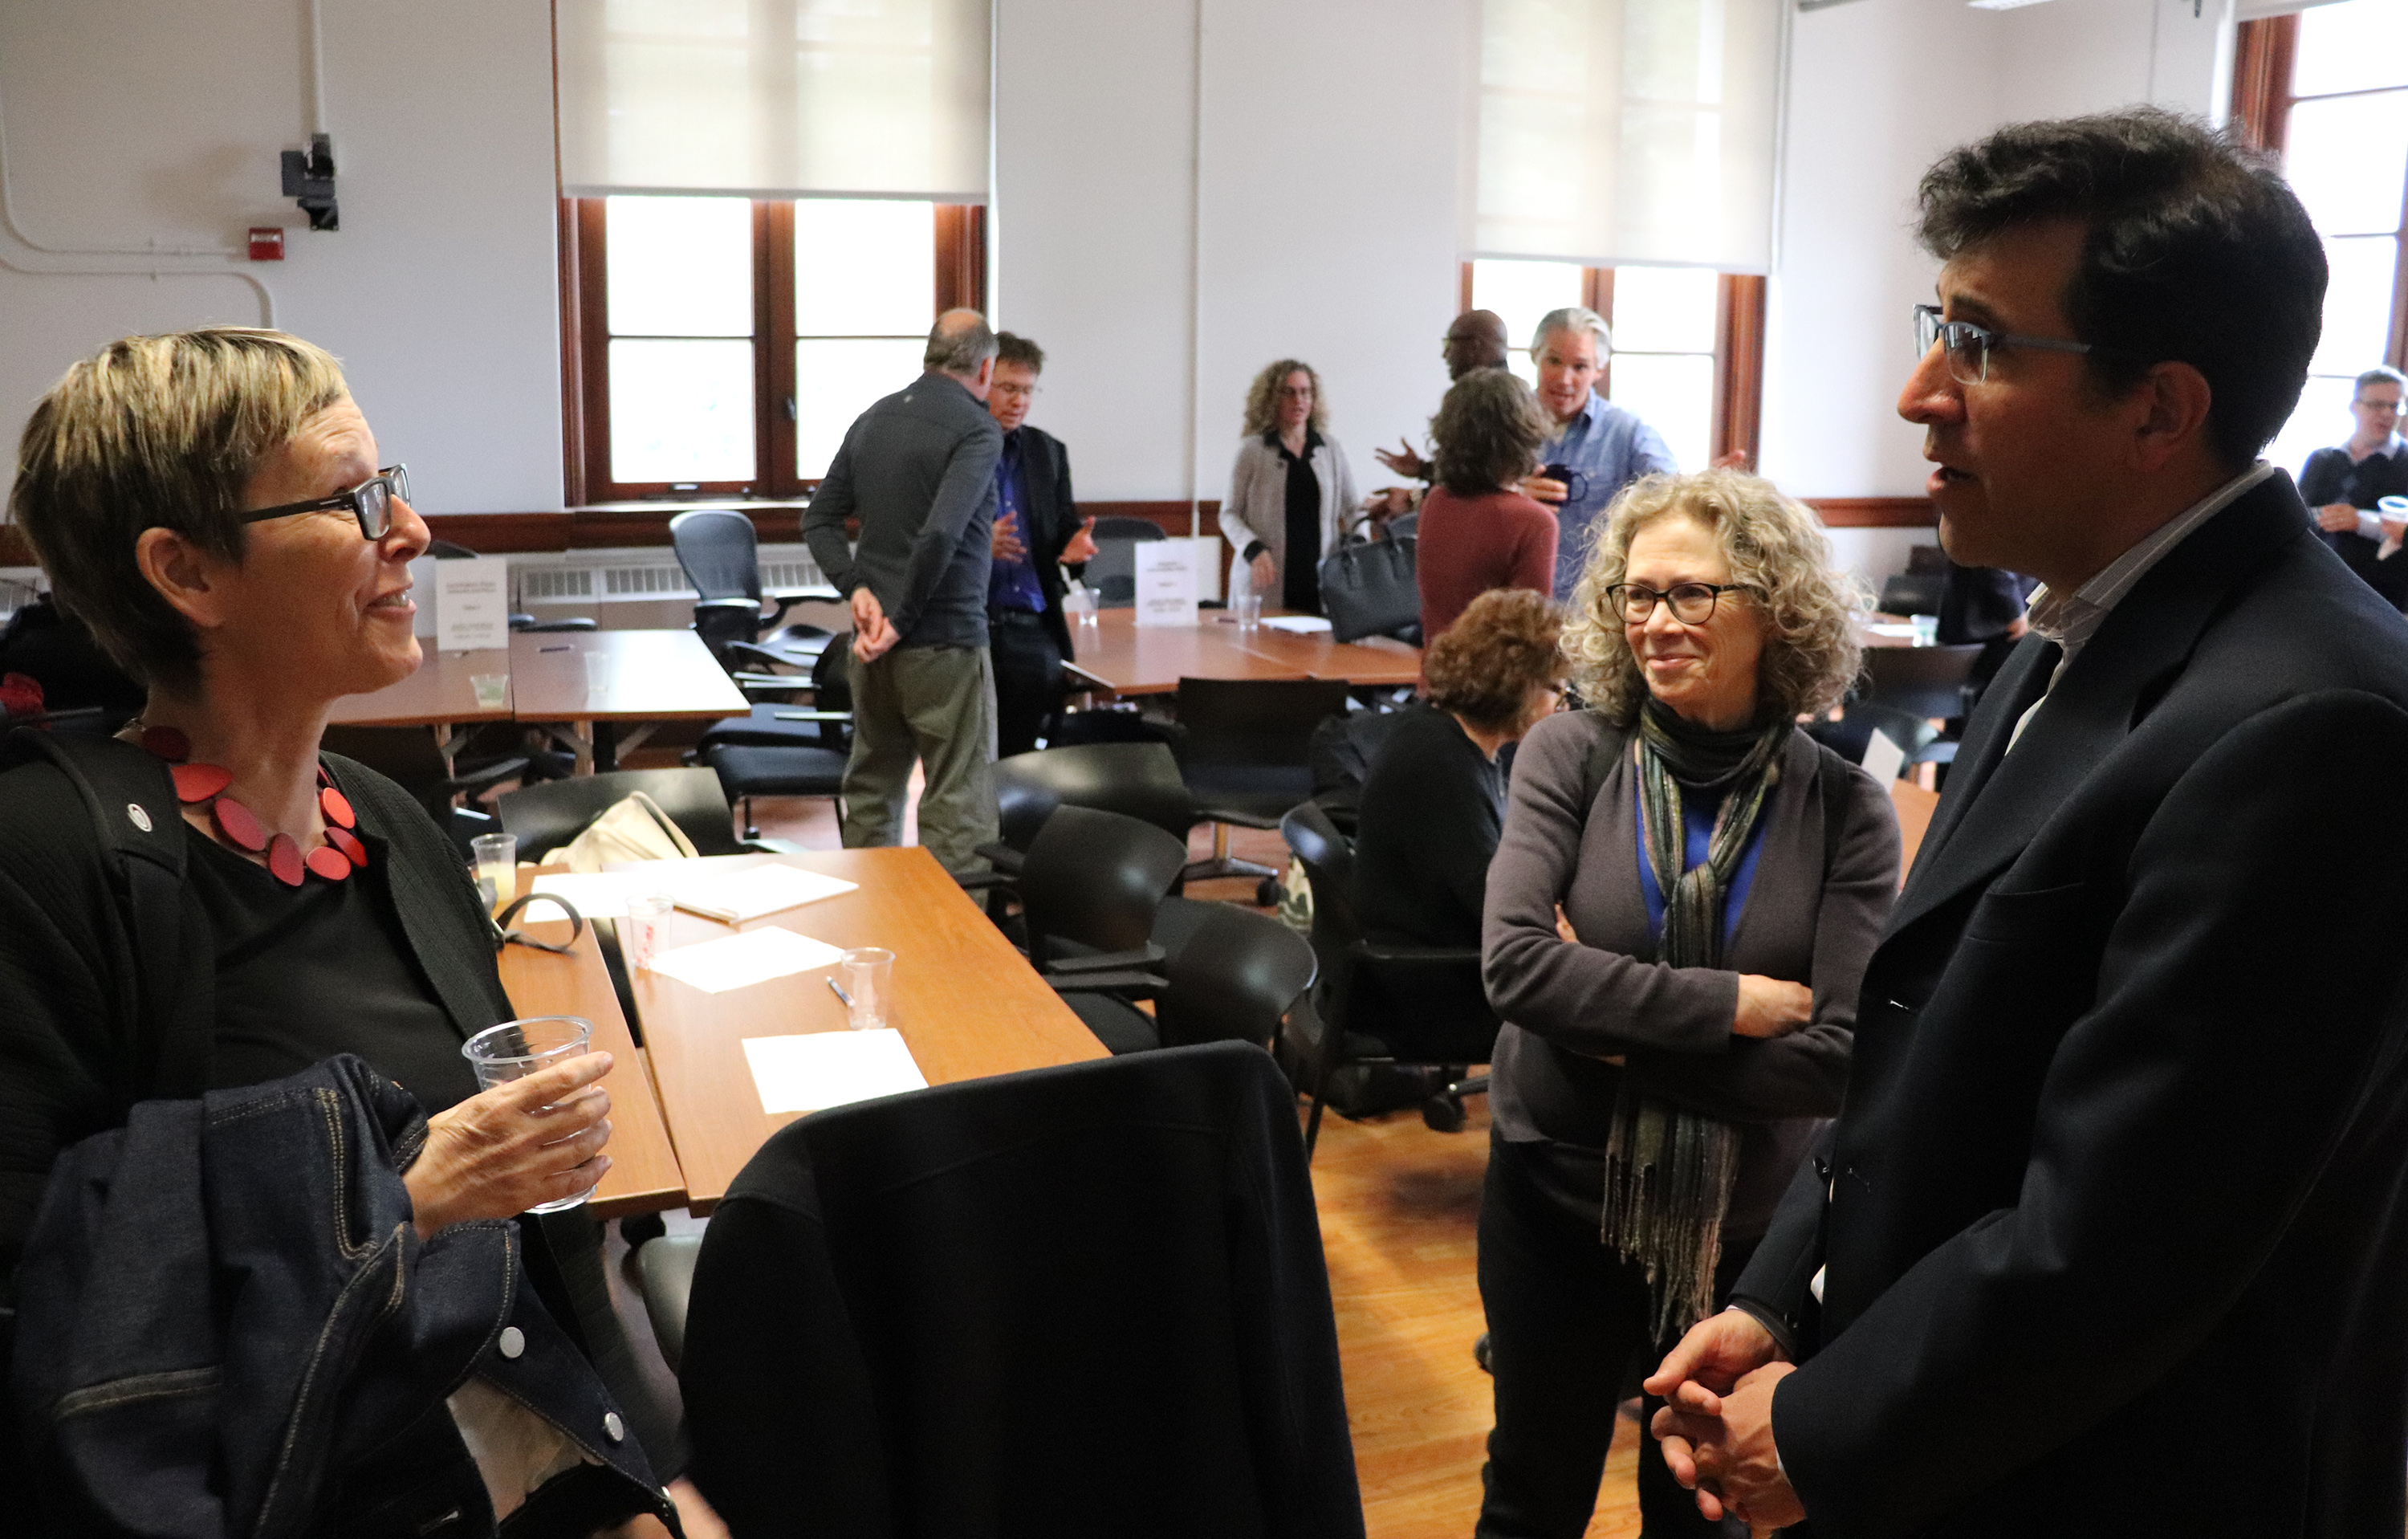 Researchers continued conversation after the roundtables